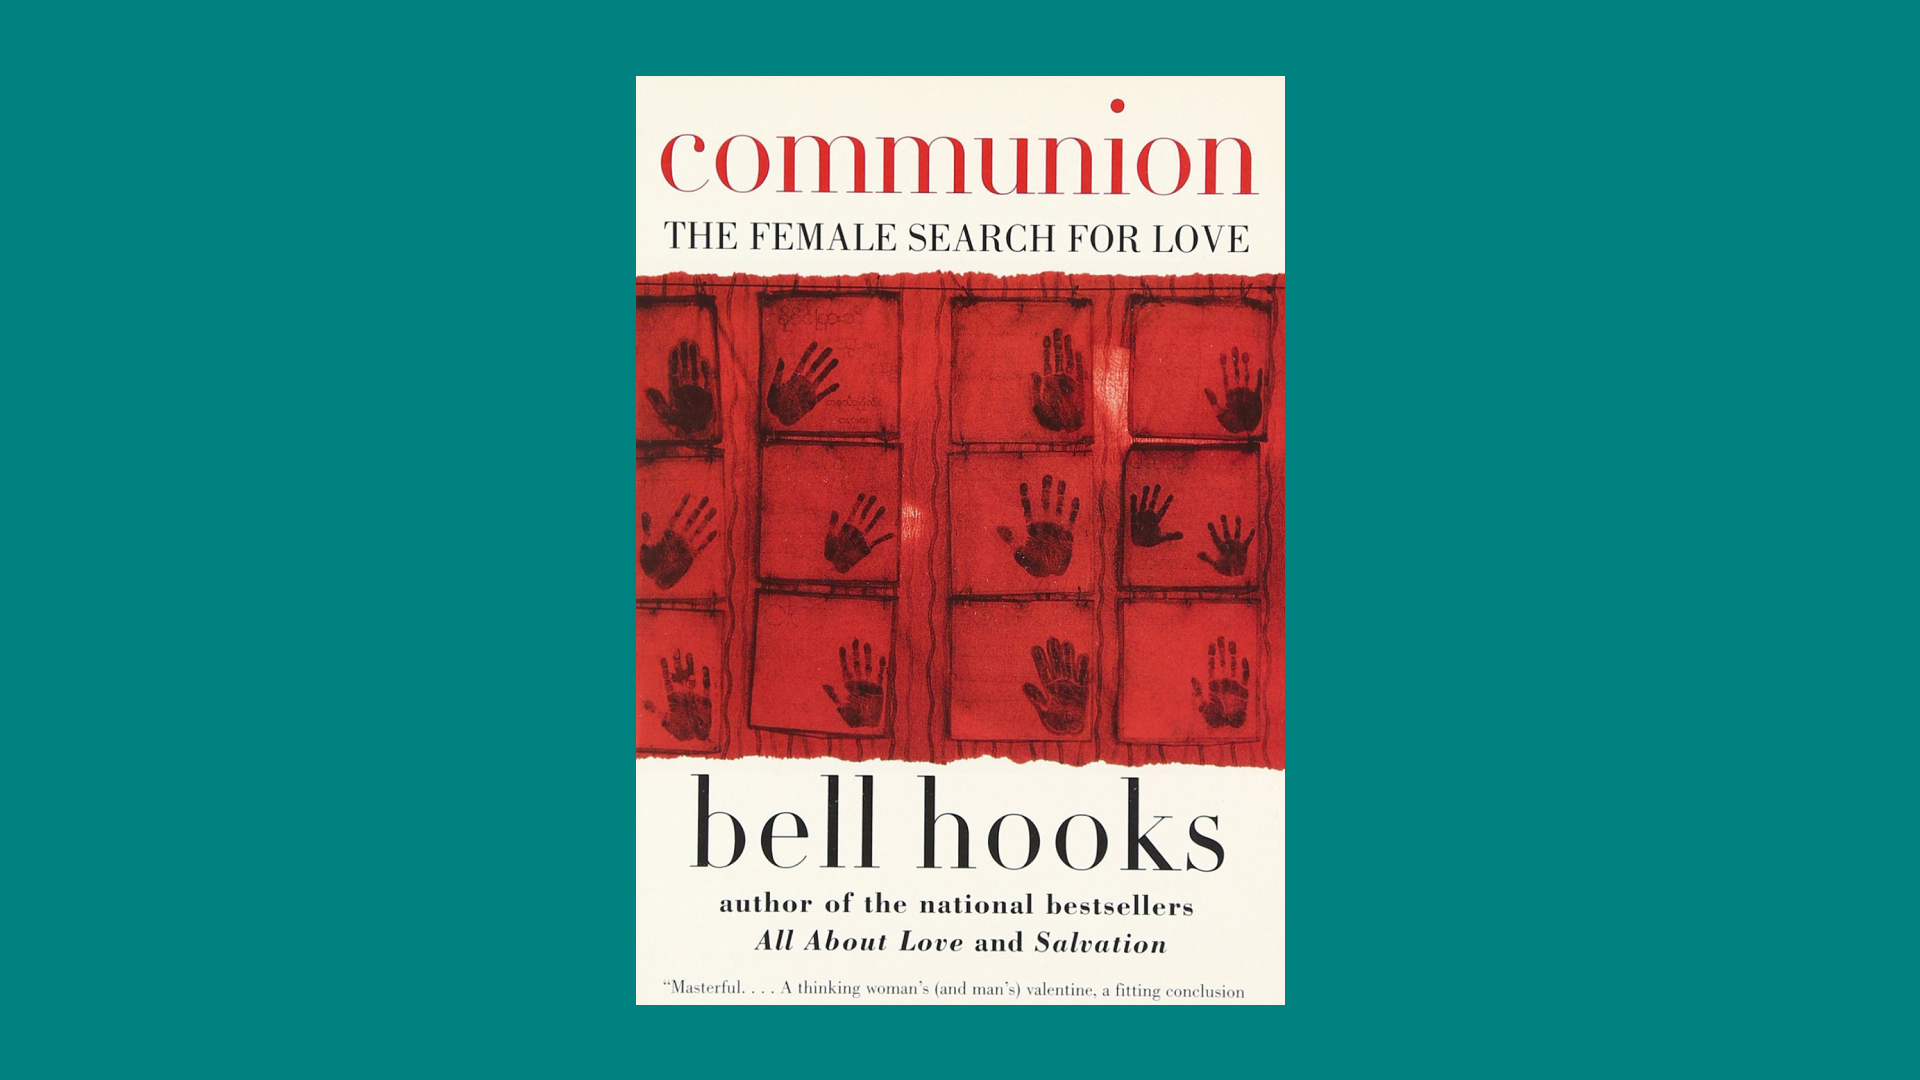 “Communion: The Female Search for Love” by bell hooks 